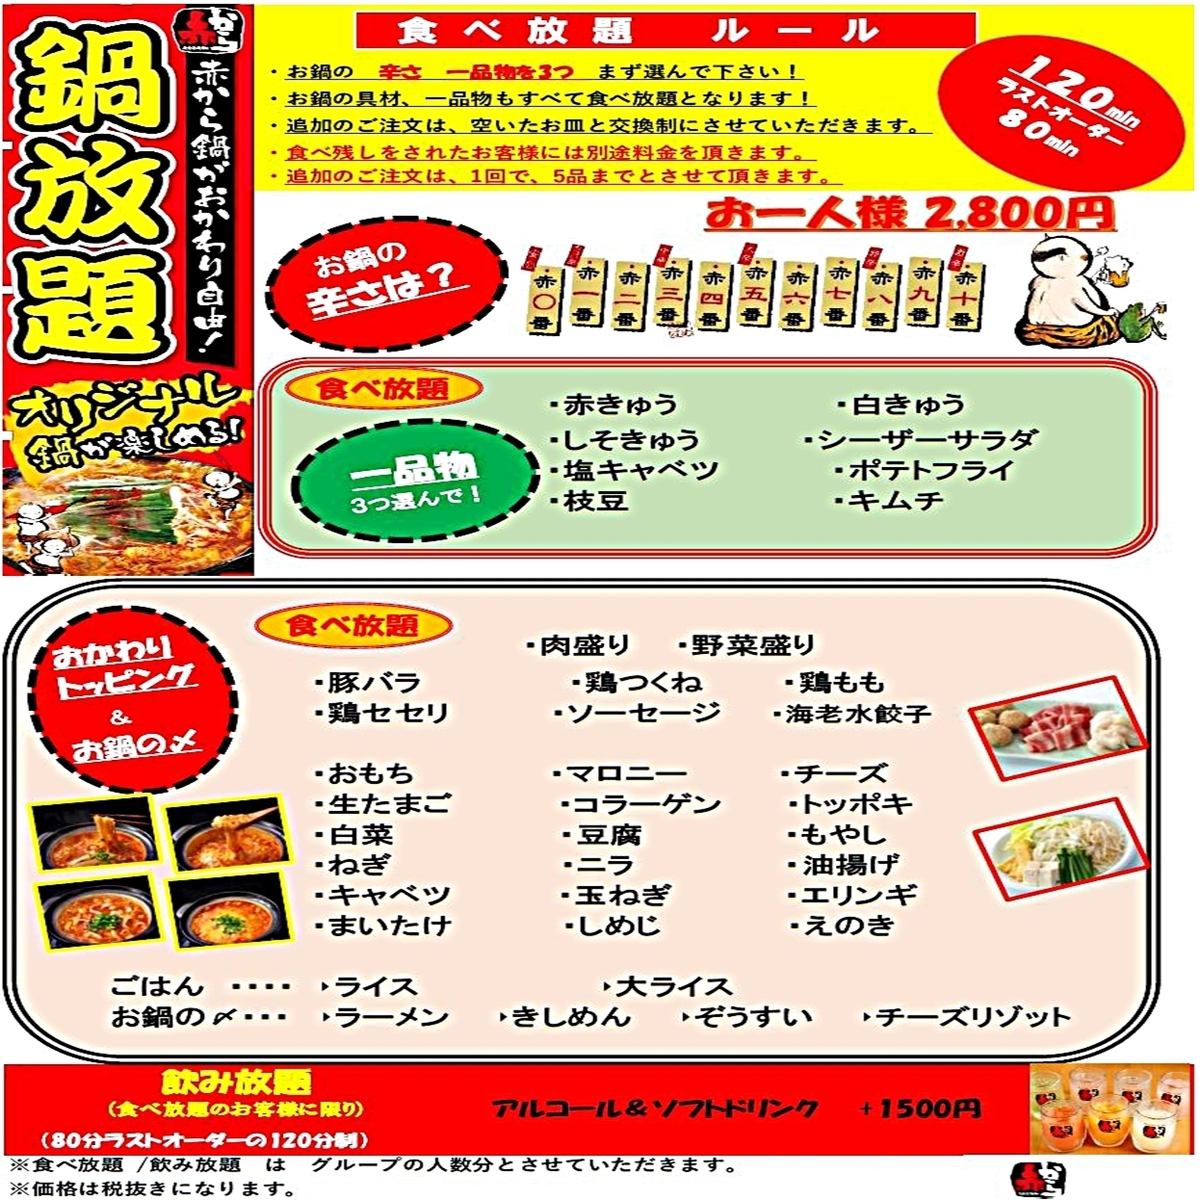 All-you-can-eat course 120 minutes system 2800 yen (excluding tax) + 1500 yen with all-you-can-eat and drink ♪